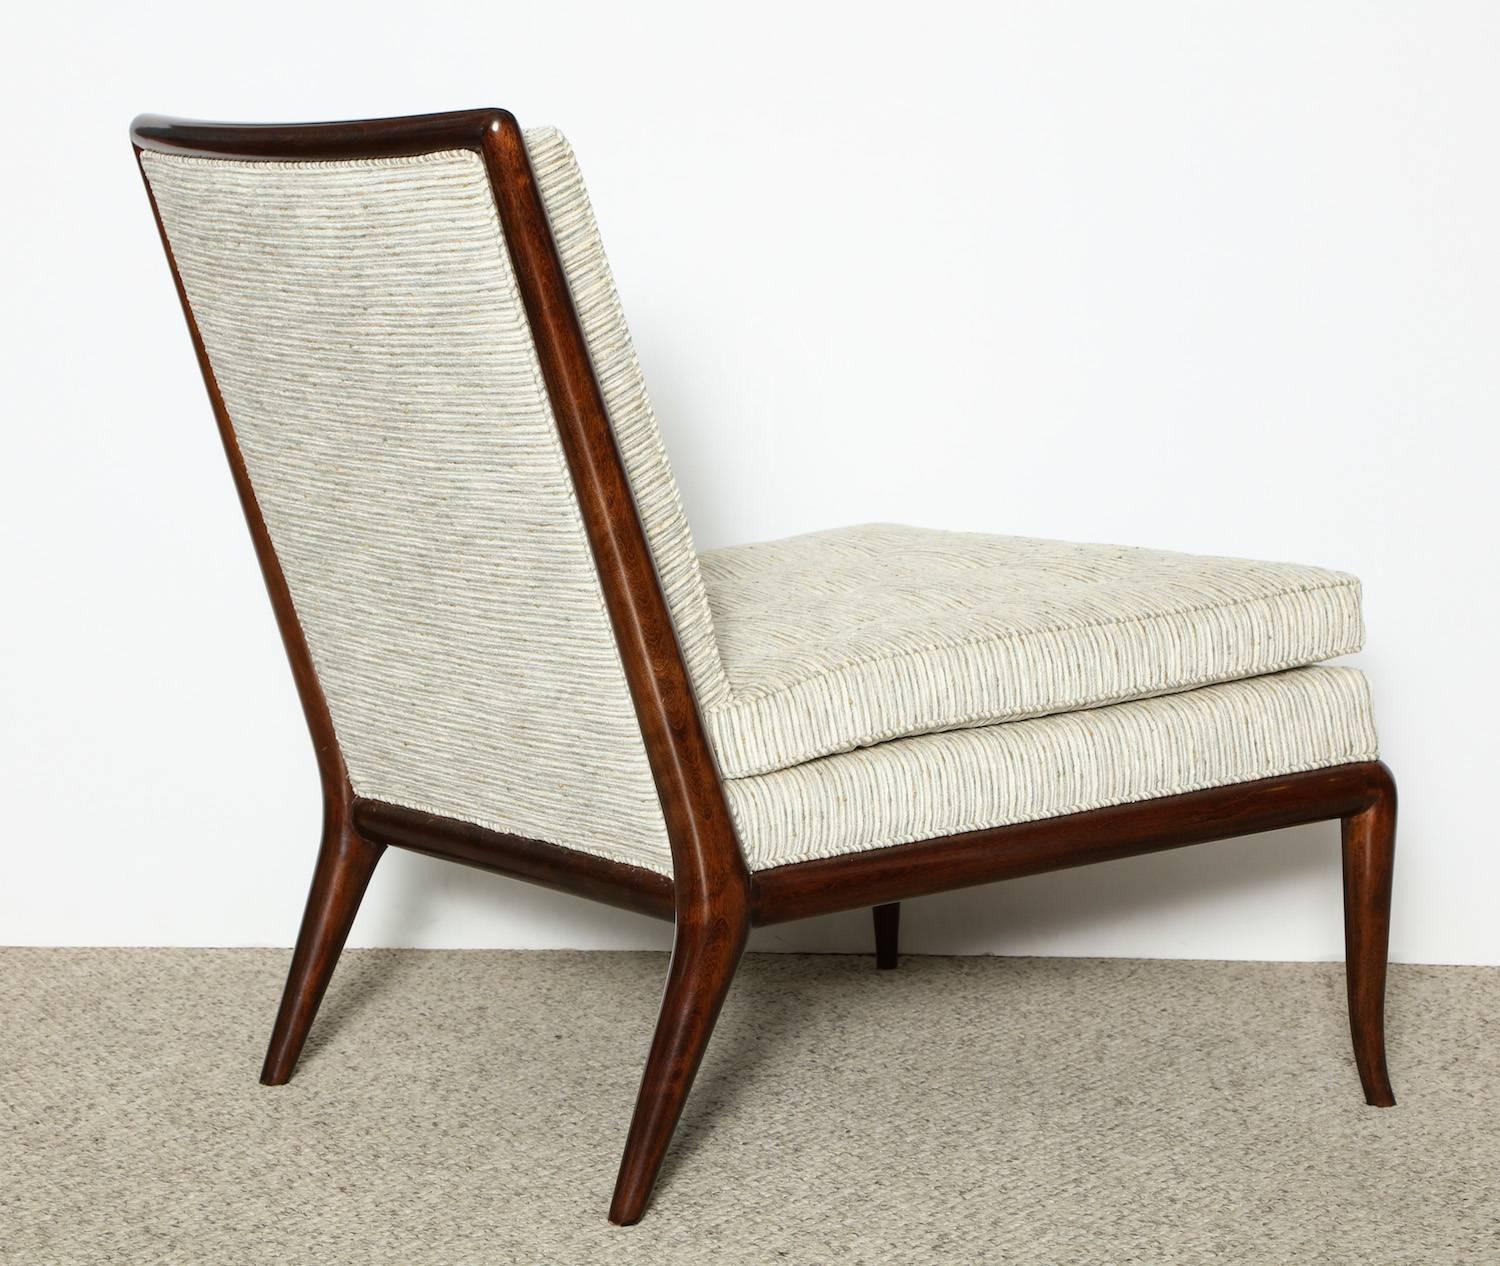 T.H. Robsjohn-Gibbings designed WMB slipper chair for Widdicomb.  Elegant form of dark stained wood and pale colored upholstery. A Robsjohn-Gibbings Classic design, with tapered legs and bull-nose framing.